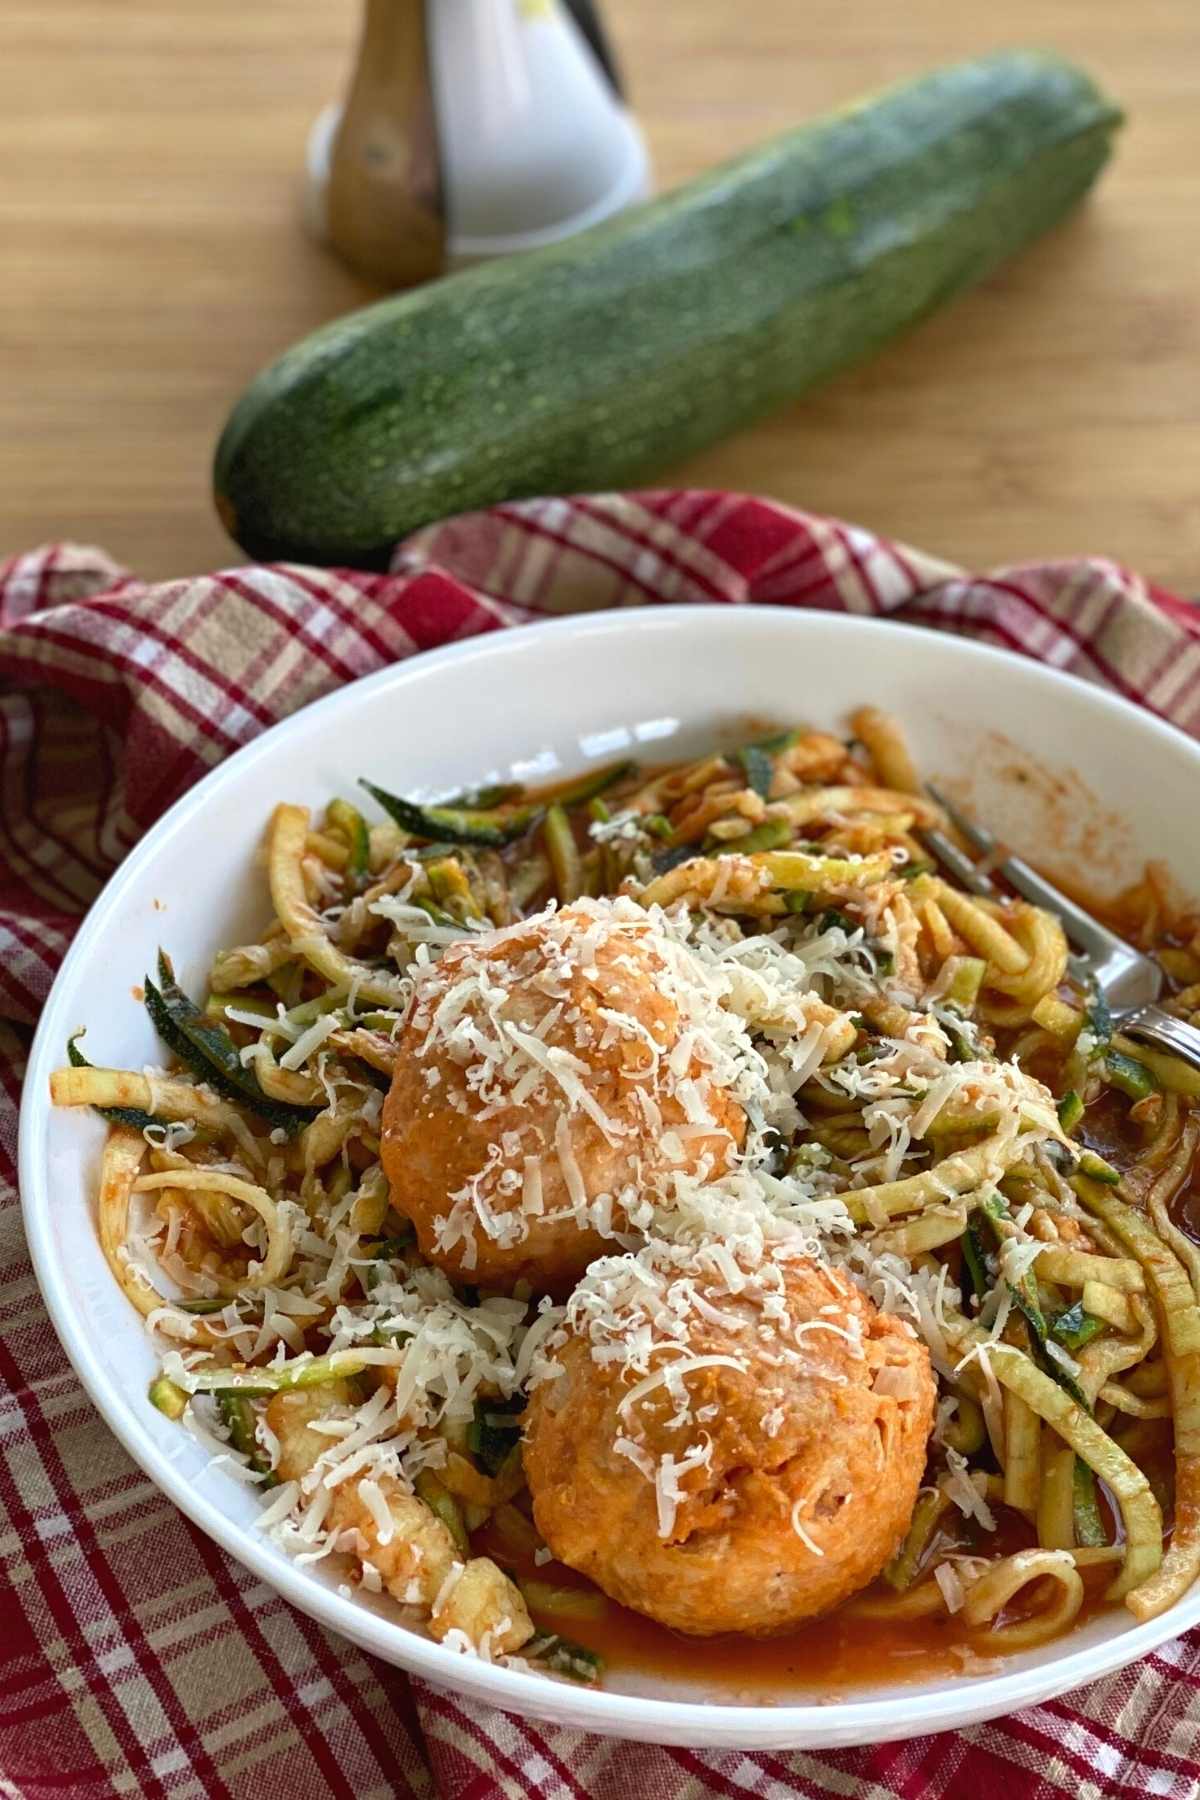 Chicken Parmesan meatballs in a bowl over zucchini noodles coated with spaghetti sauce and topped with more cheese.